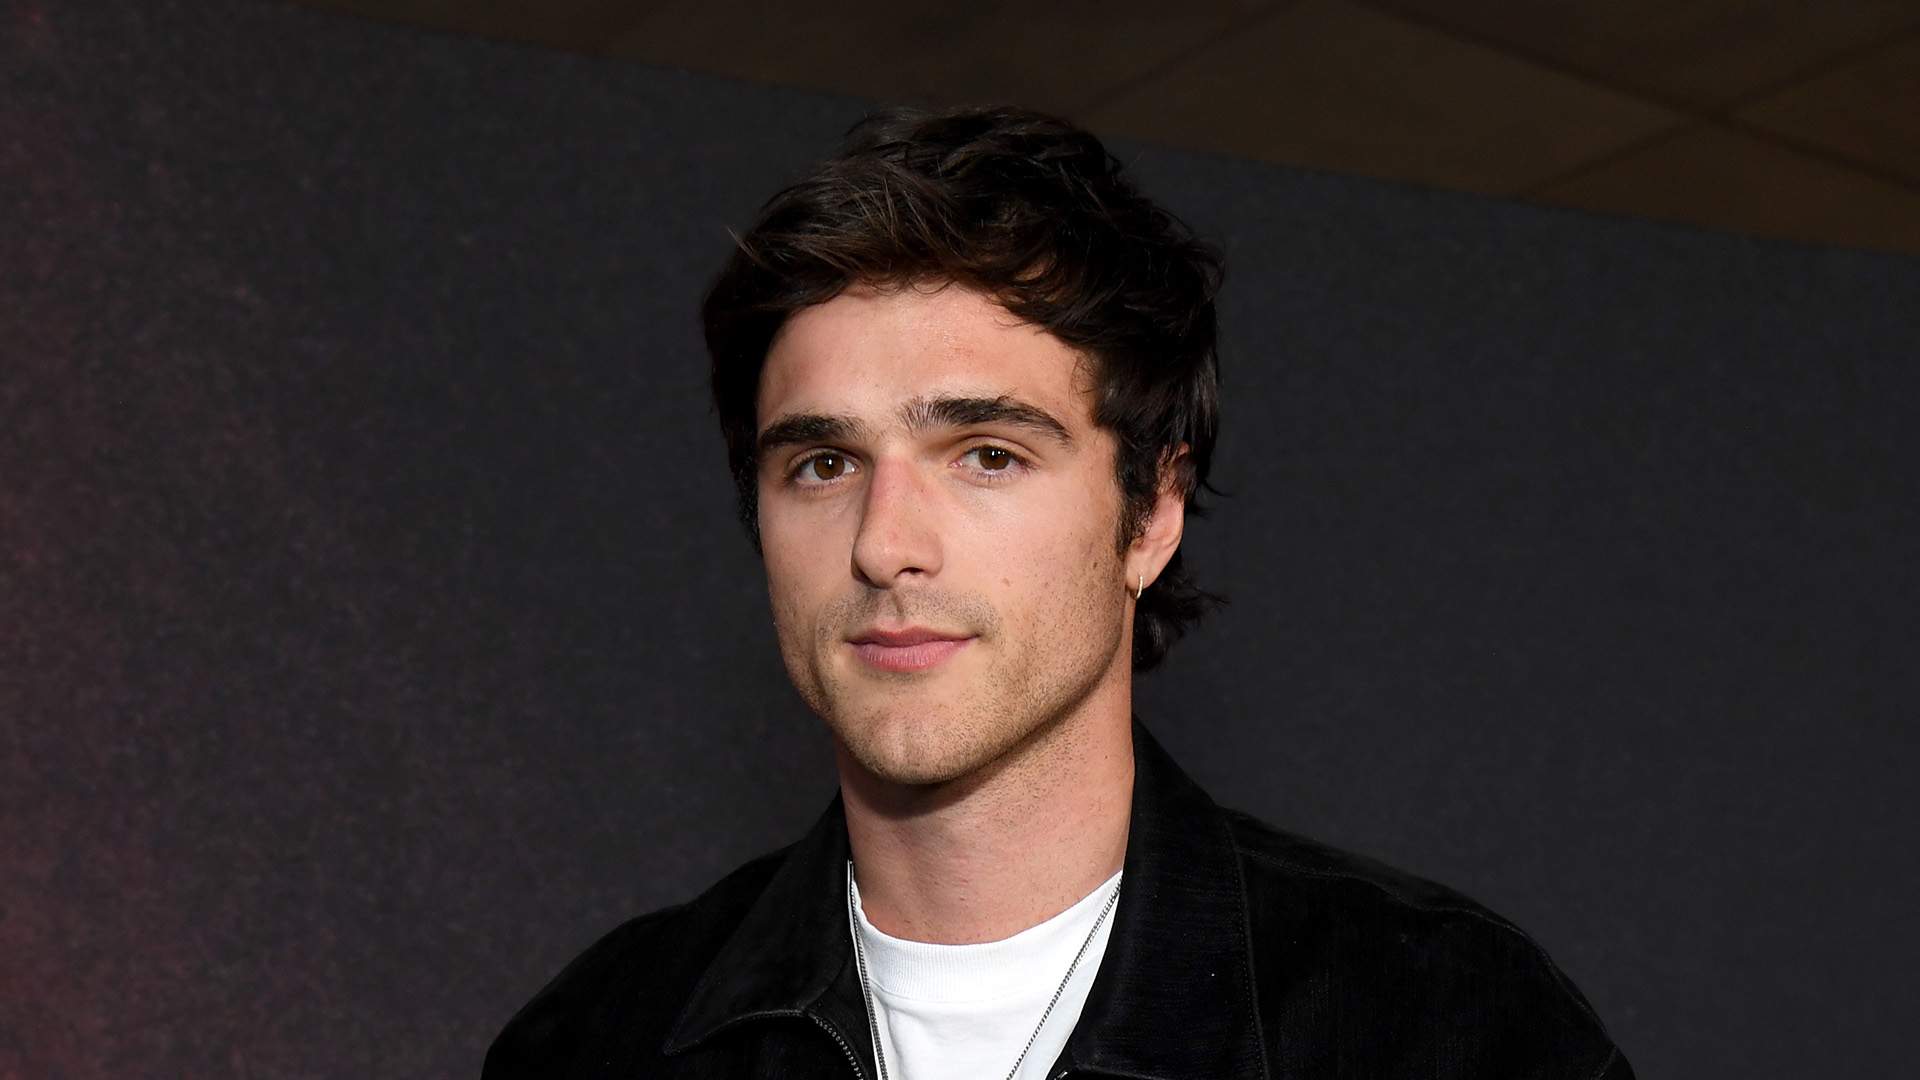 Jacob Elordi Is Returning to Australia to Star in Five-Part Drama Series 'The Narrow Road to the Deep North'